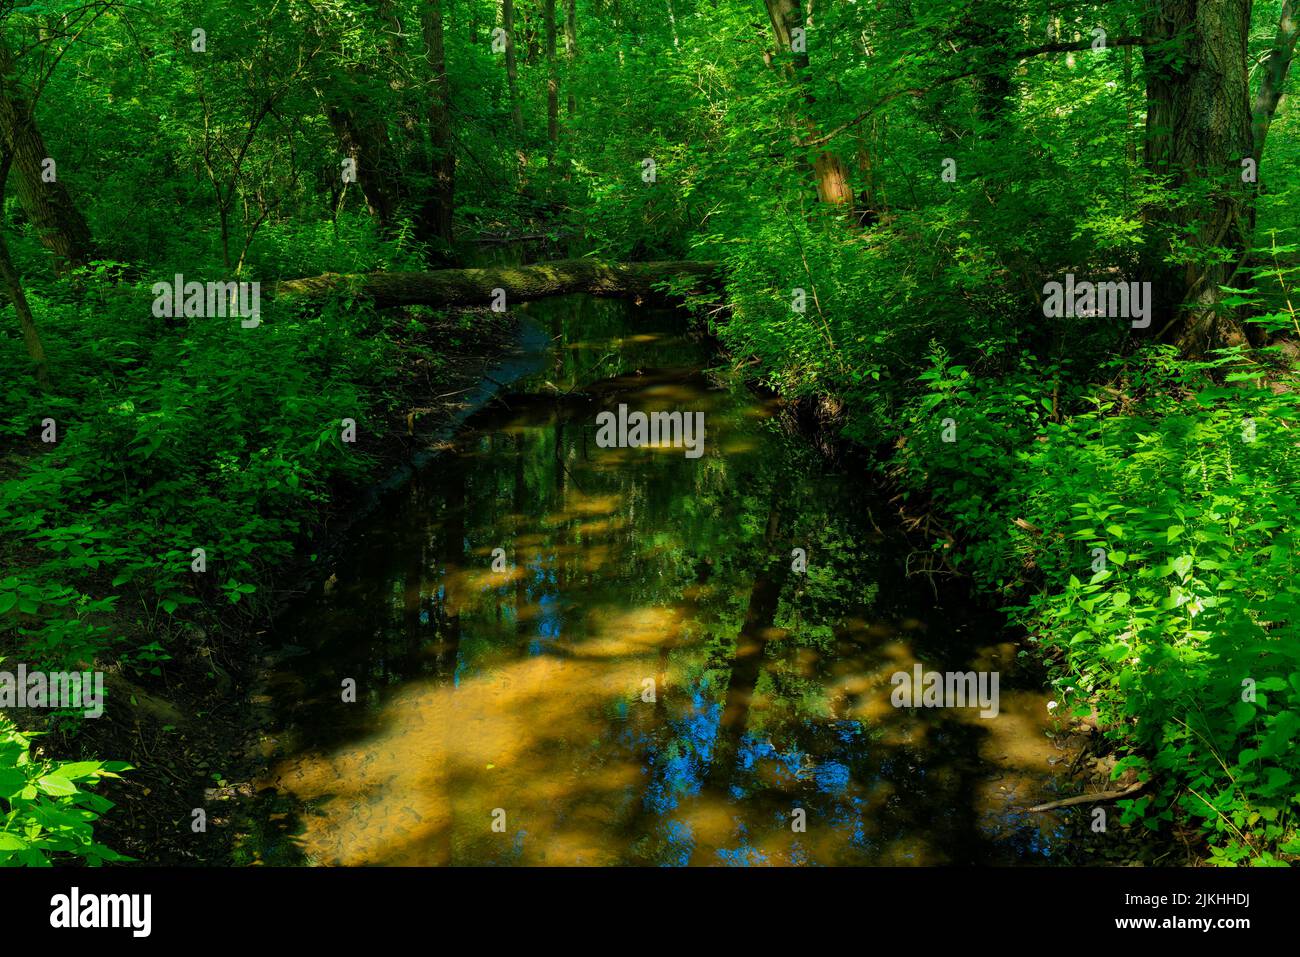 Small river in summer in a forest, overturned tree lies across the river Stock Photo